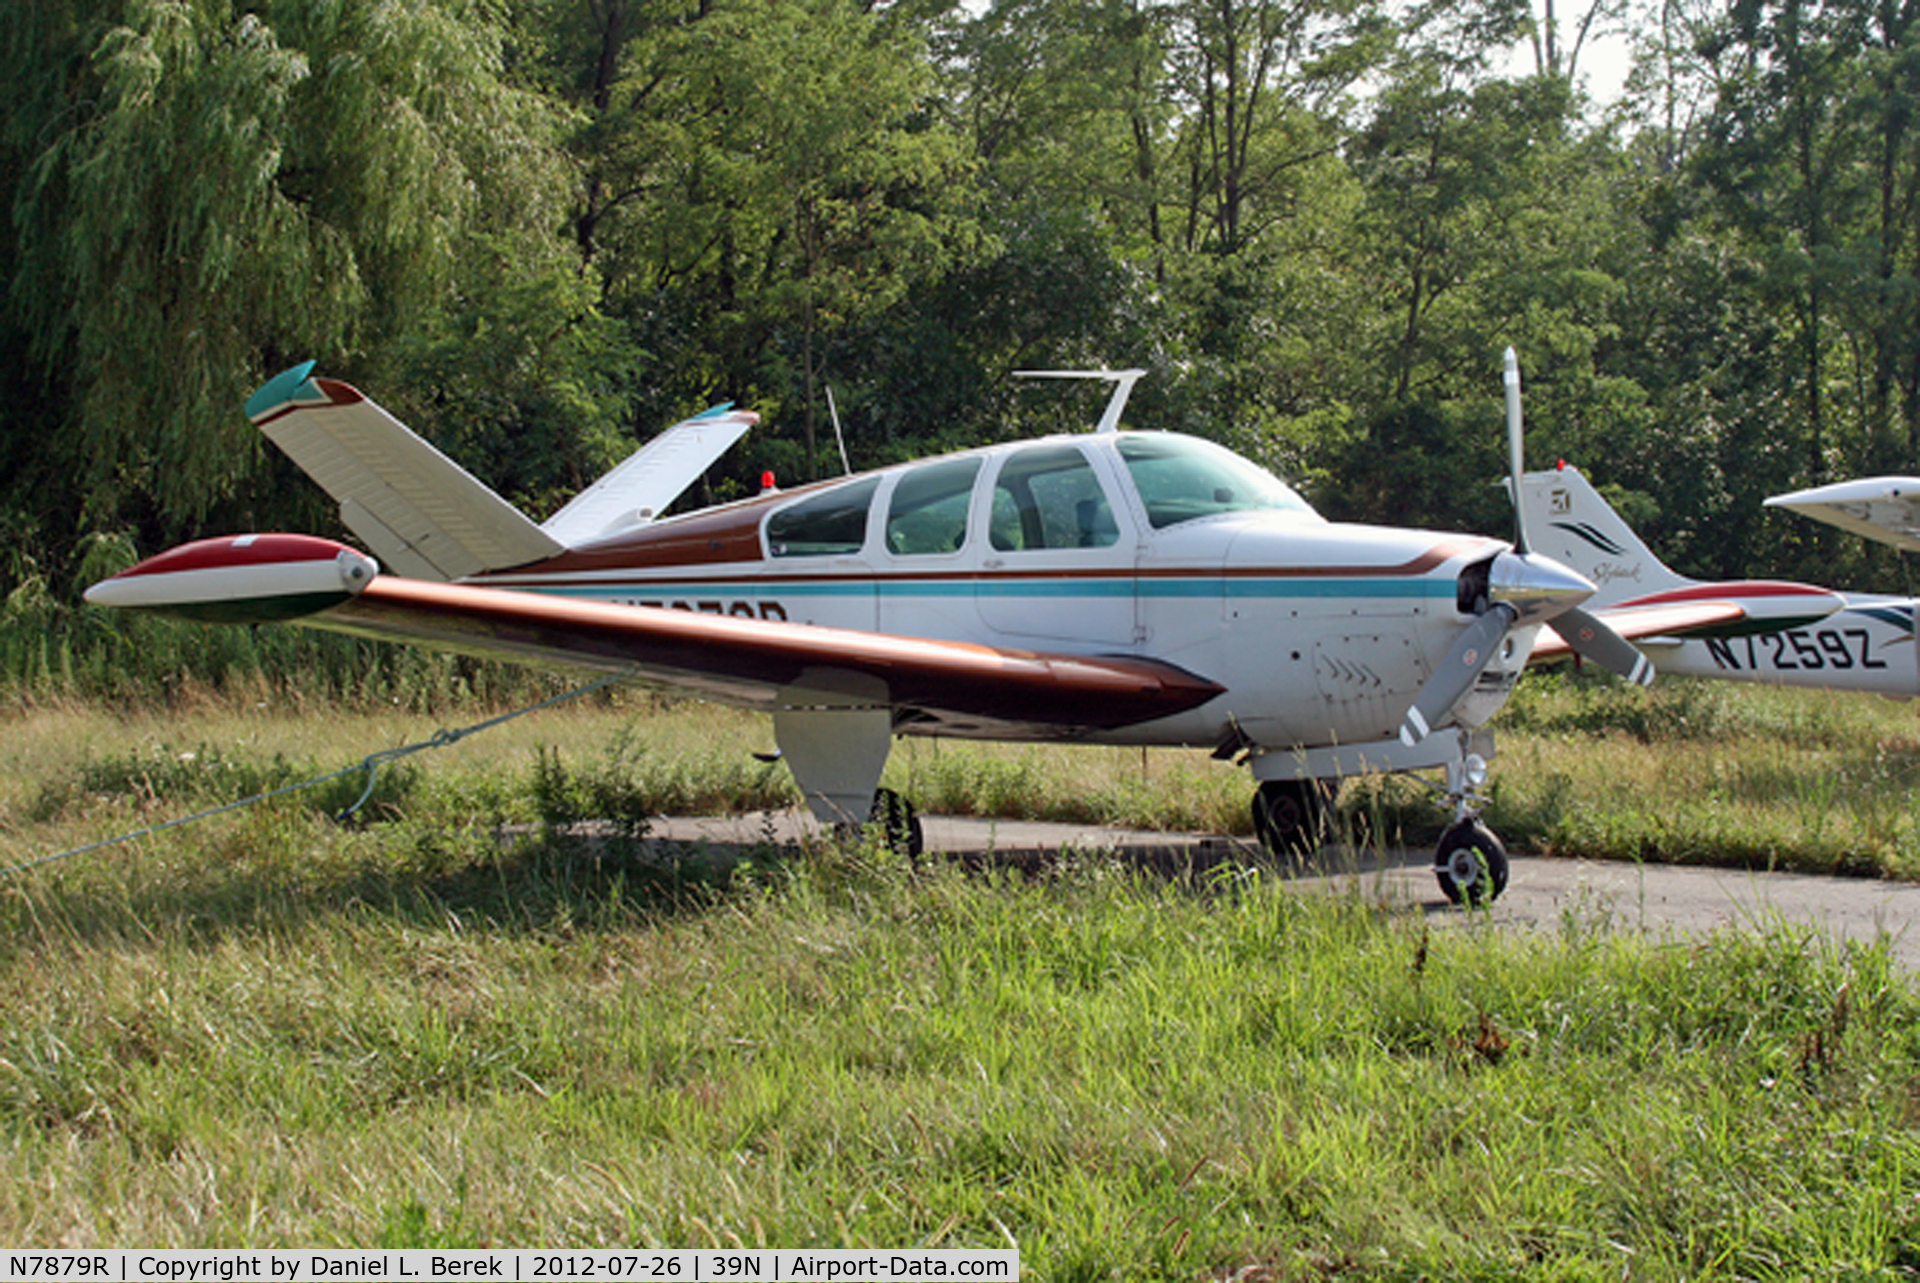 N7879R, 1969 Beech V35A Bonanza C/N D-8936, This cool old Beechcraft was sitting in the backlot of Princeton Airport.